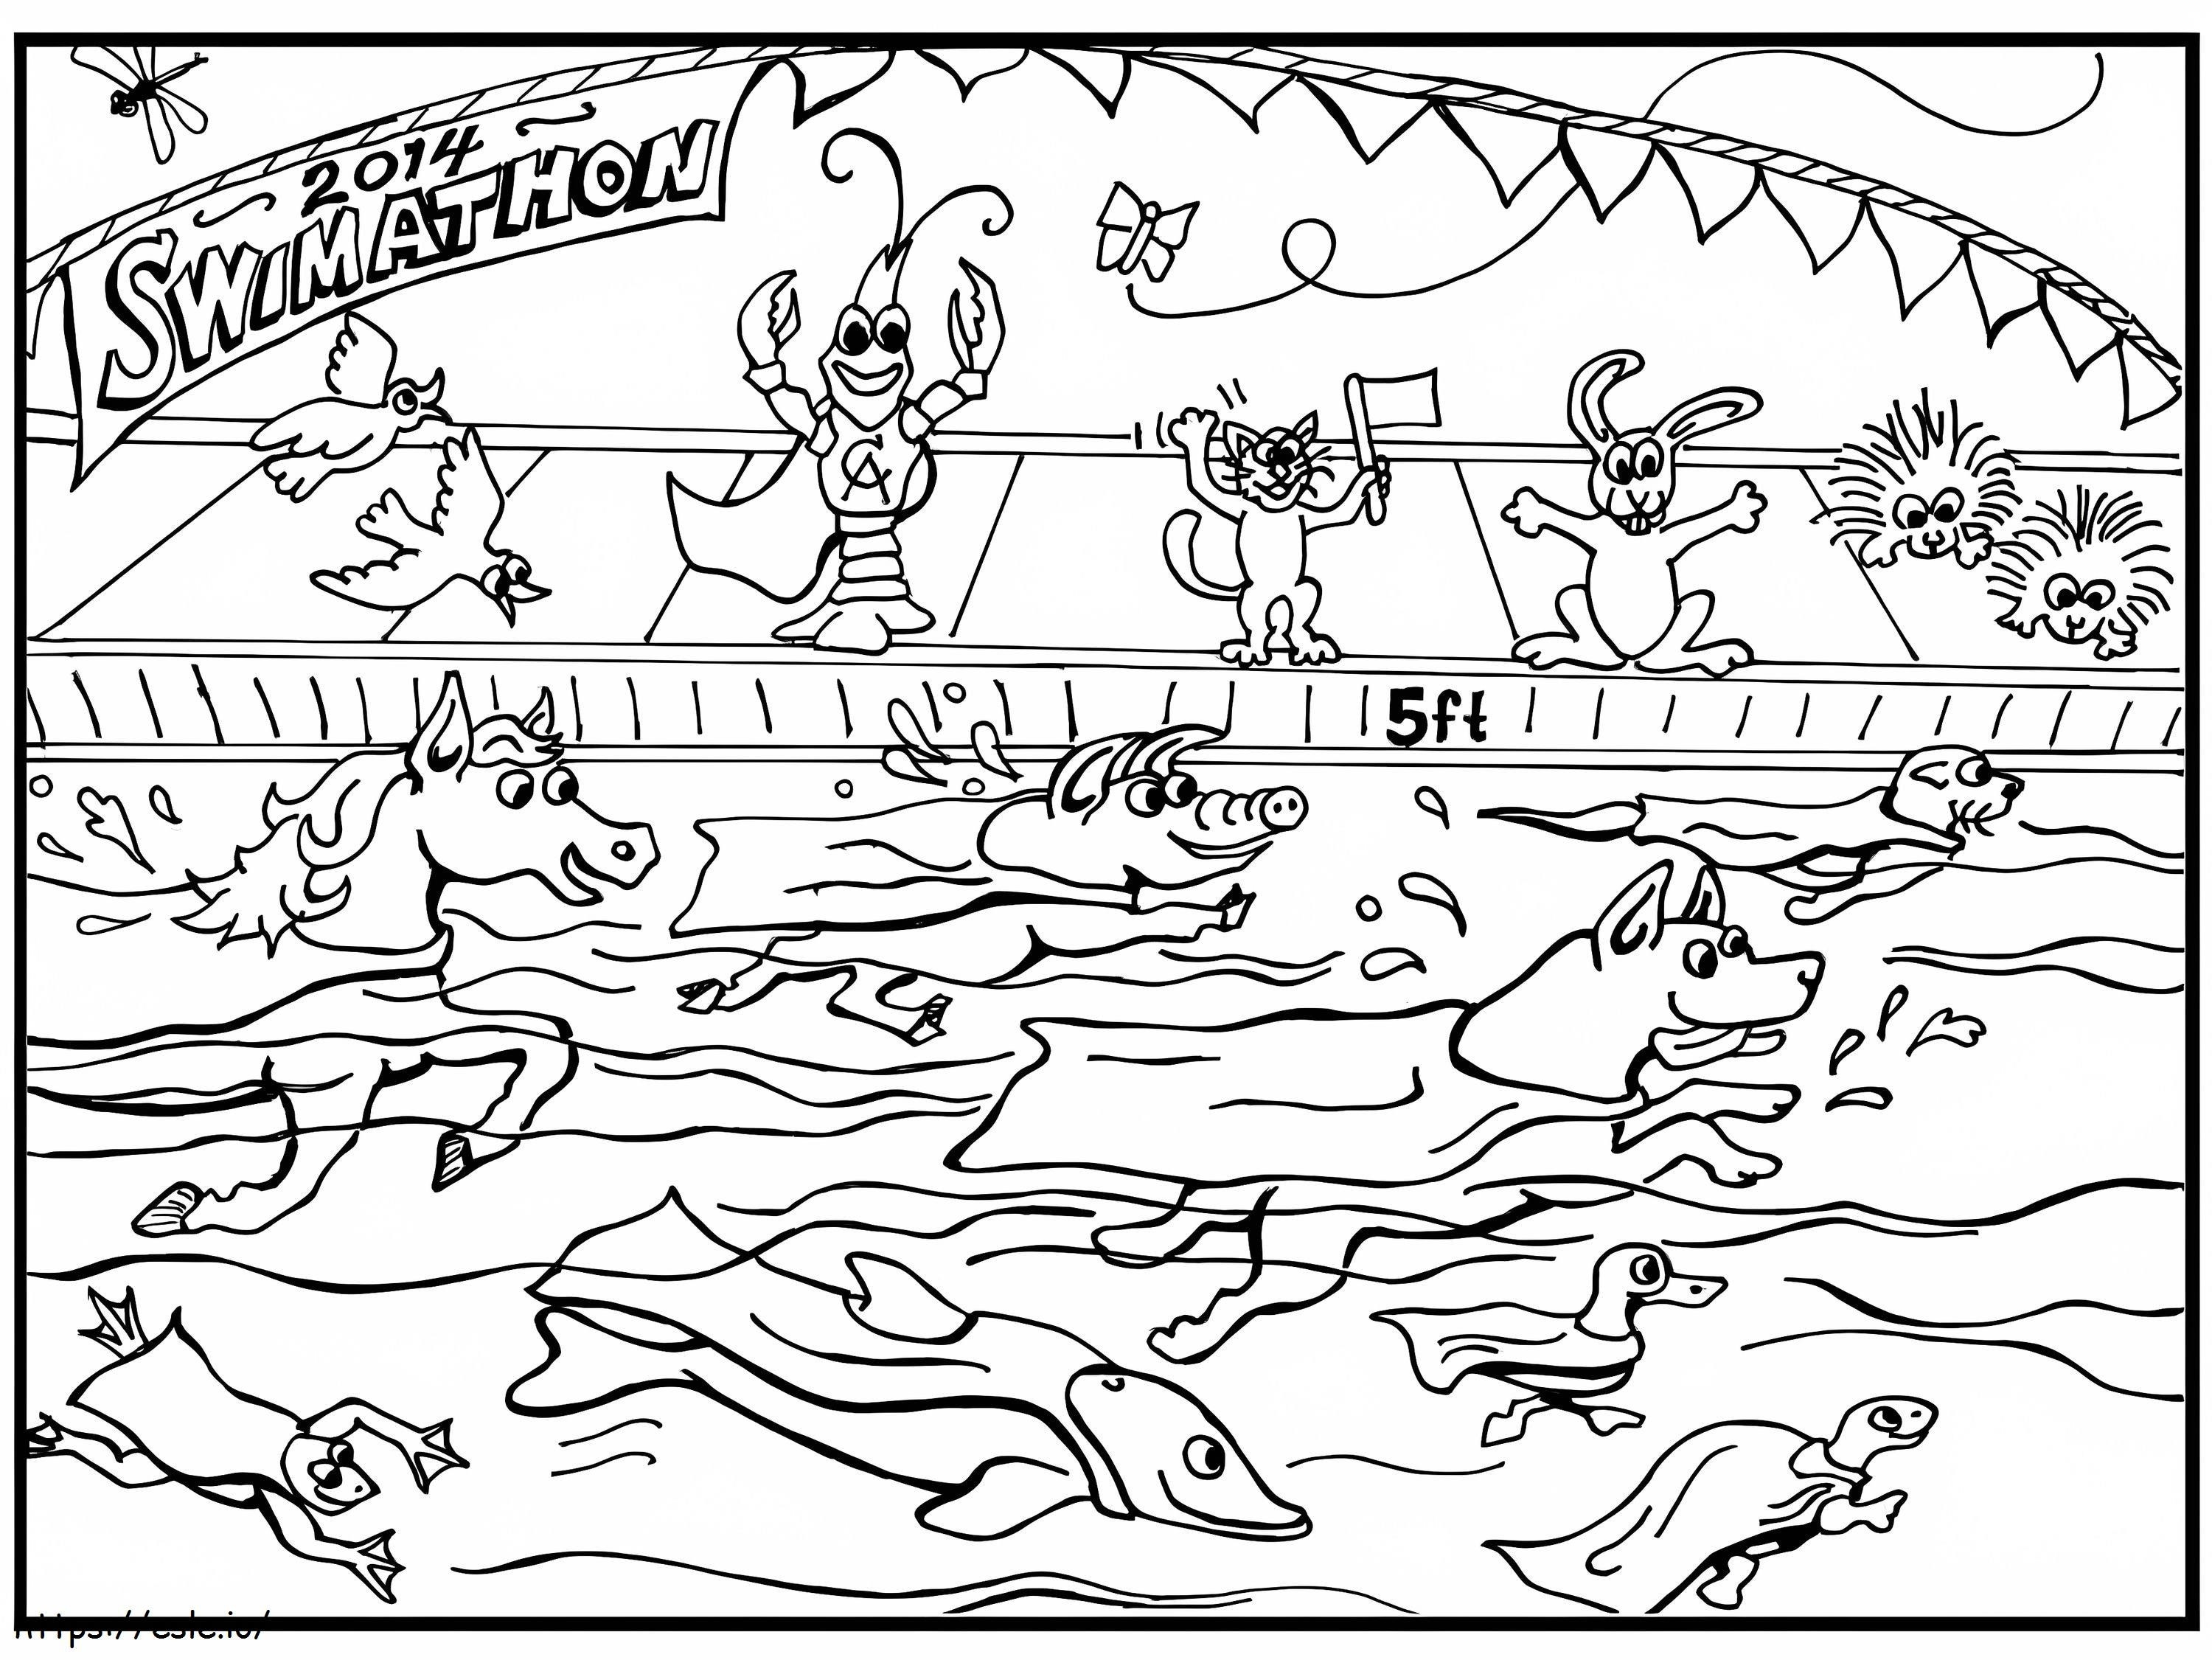 Animals In Pool coloring page